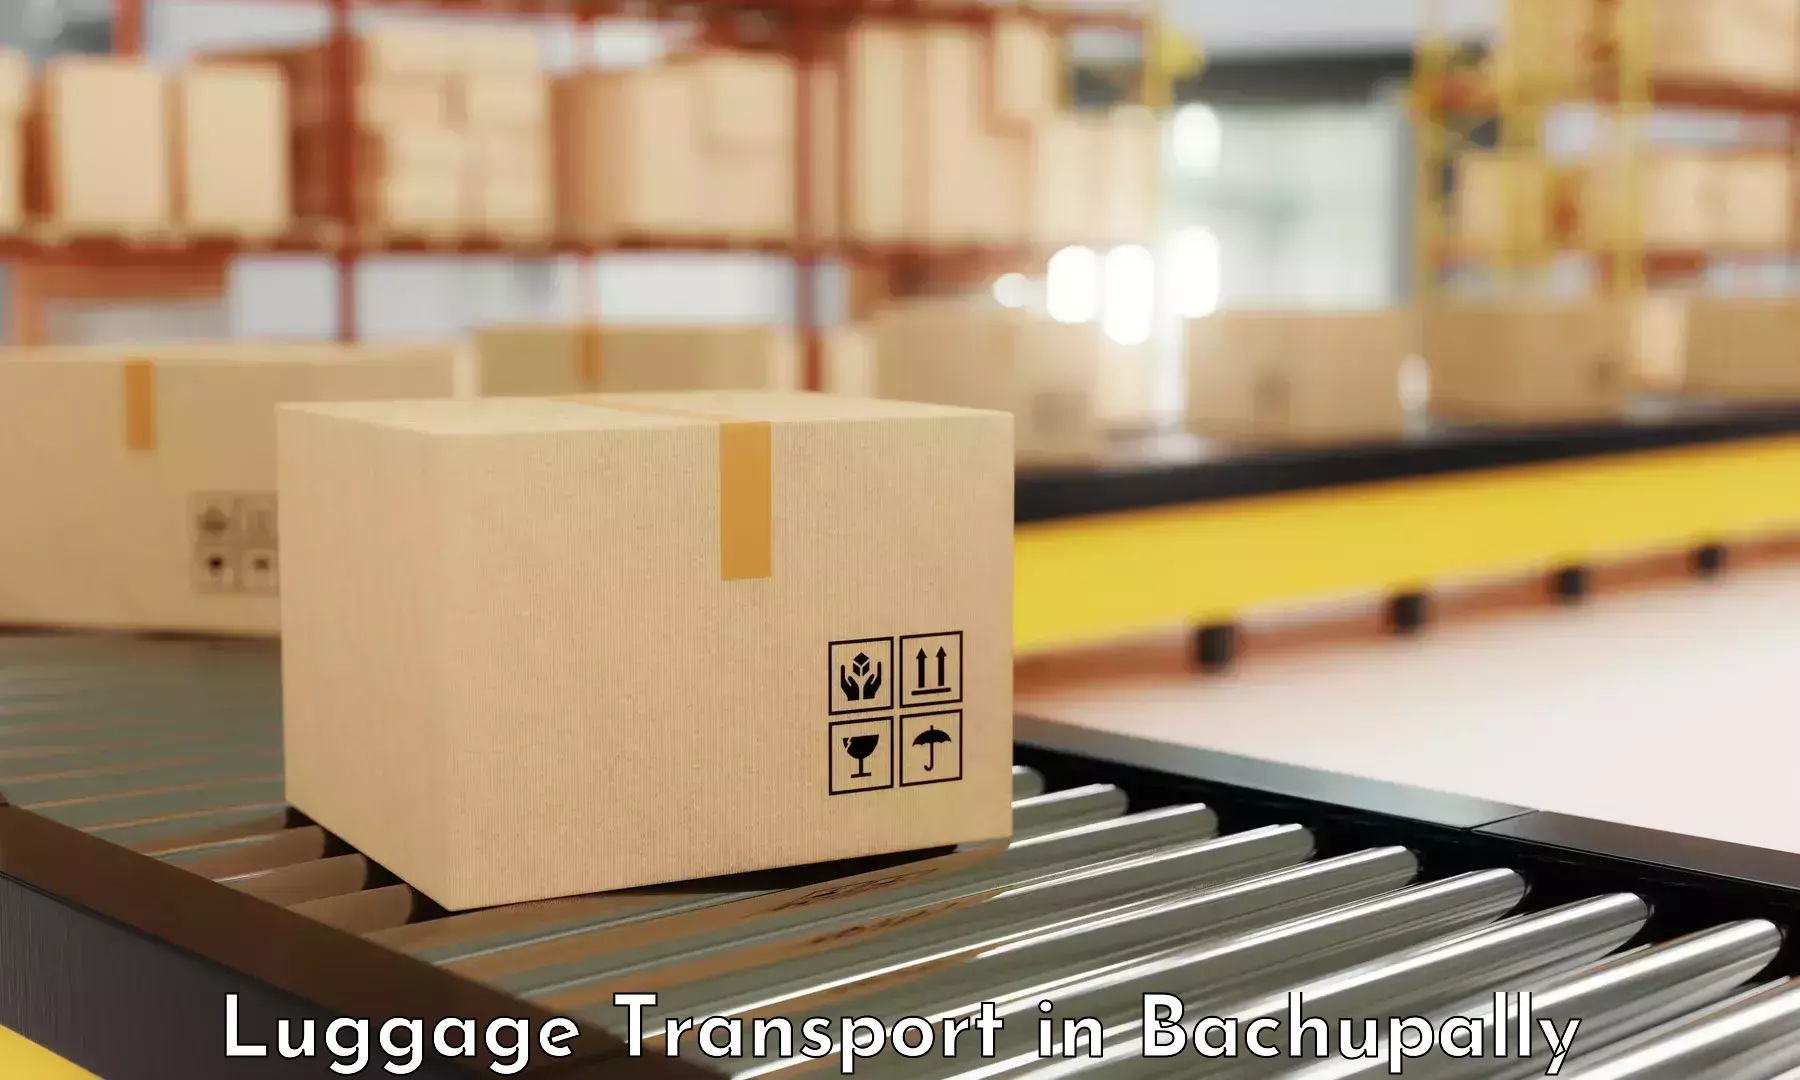 Baggage transport network in Bachupally